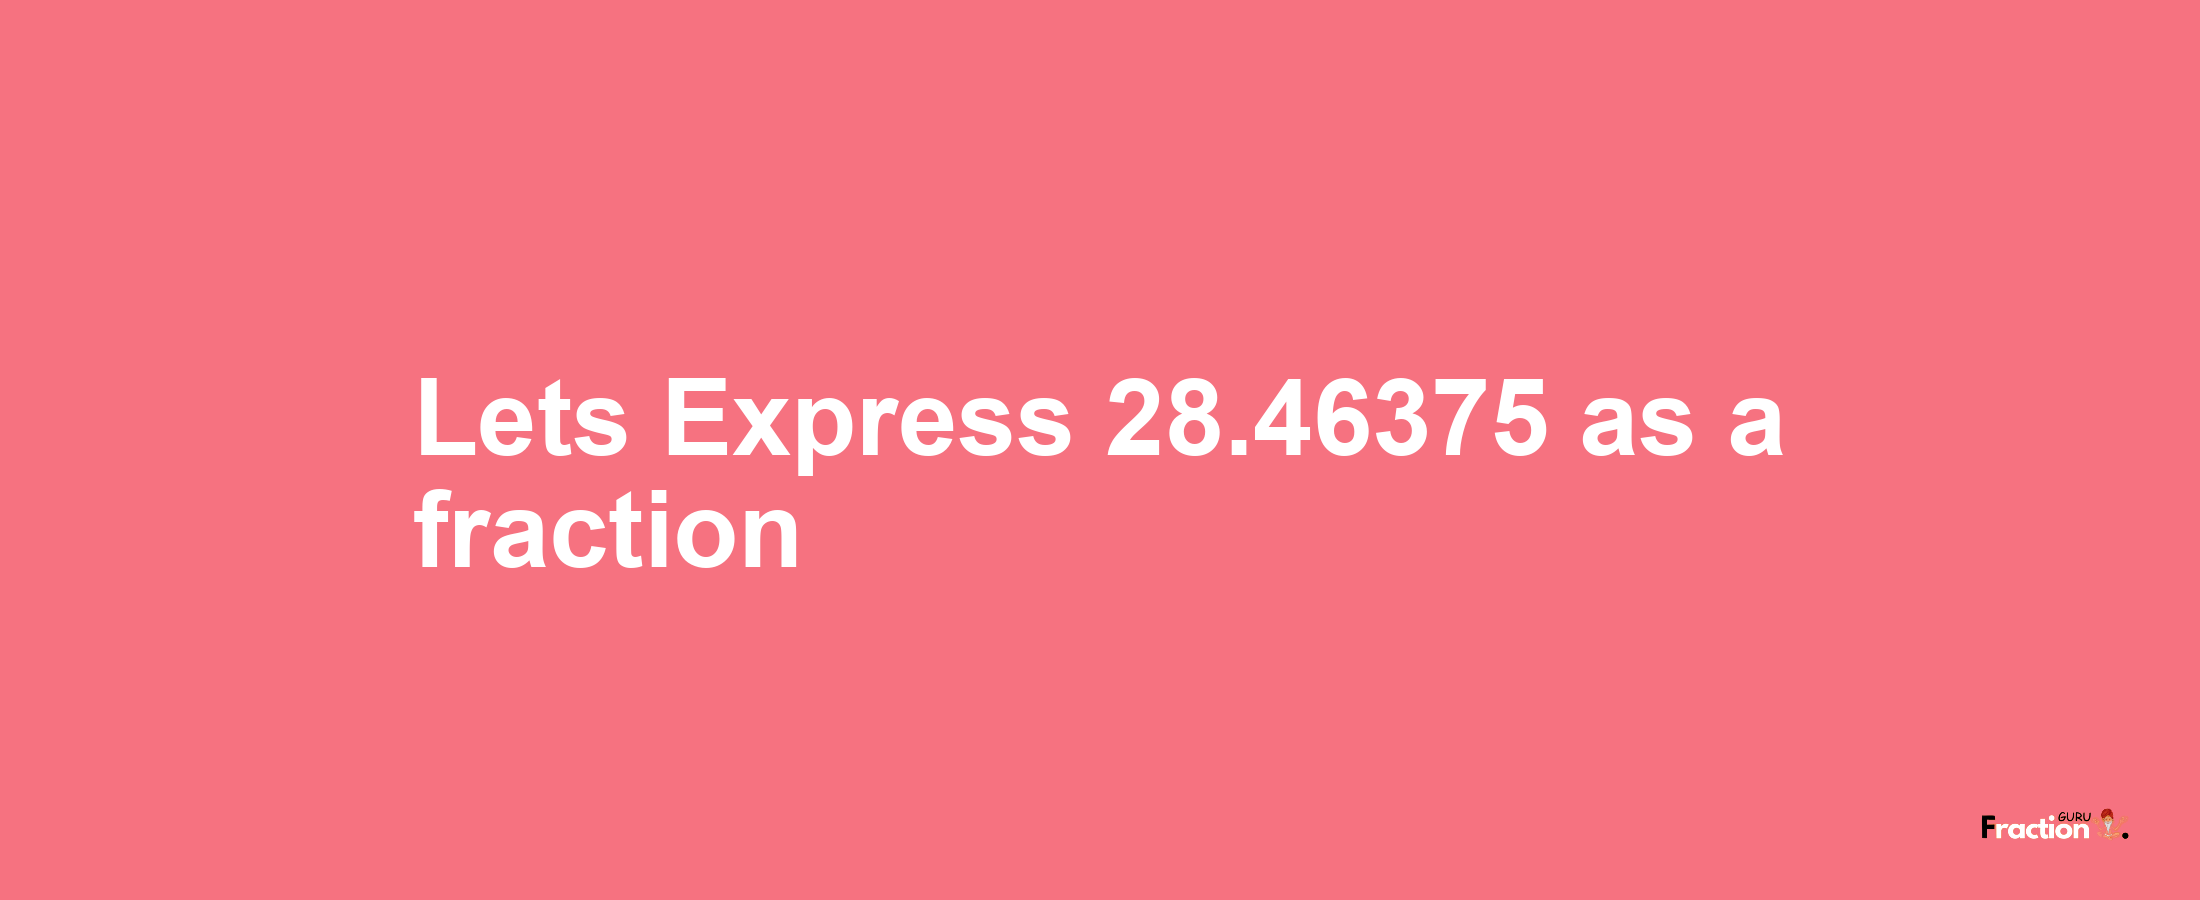 Lets Express 28.46375 as afraction